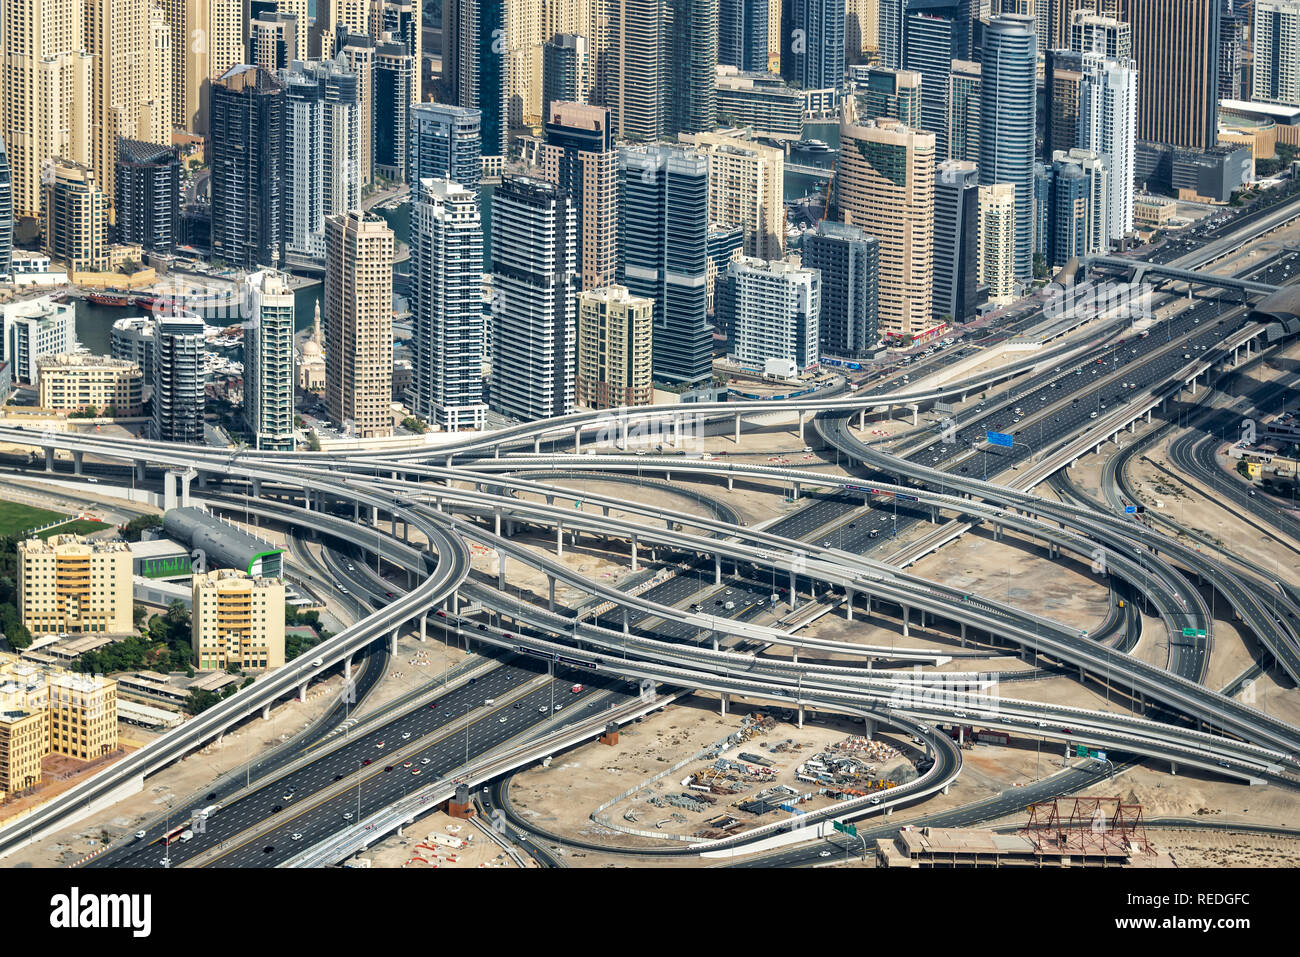 Aerial view of Sheikh Zayeg road highway interchange and buidings, United Arab Emirates Stock Photo